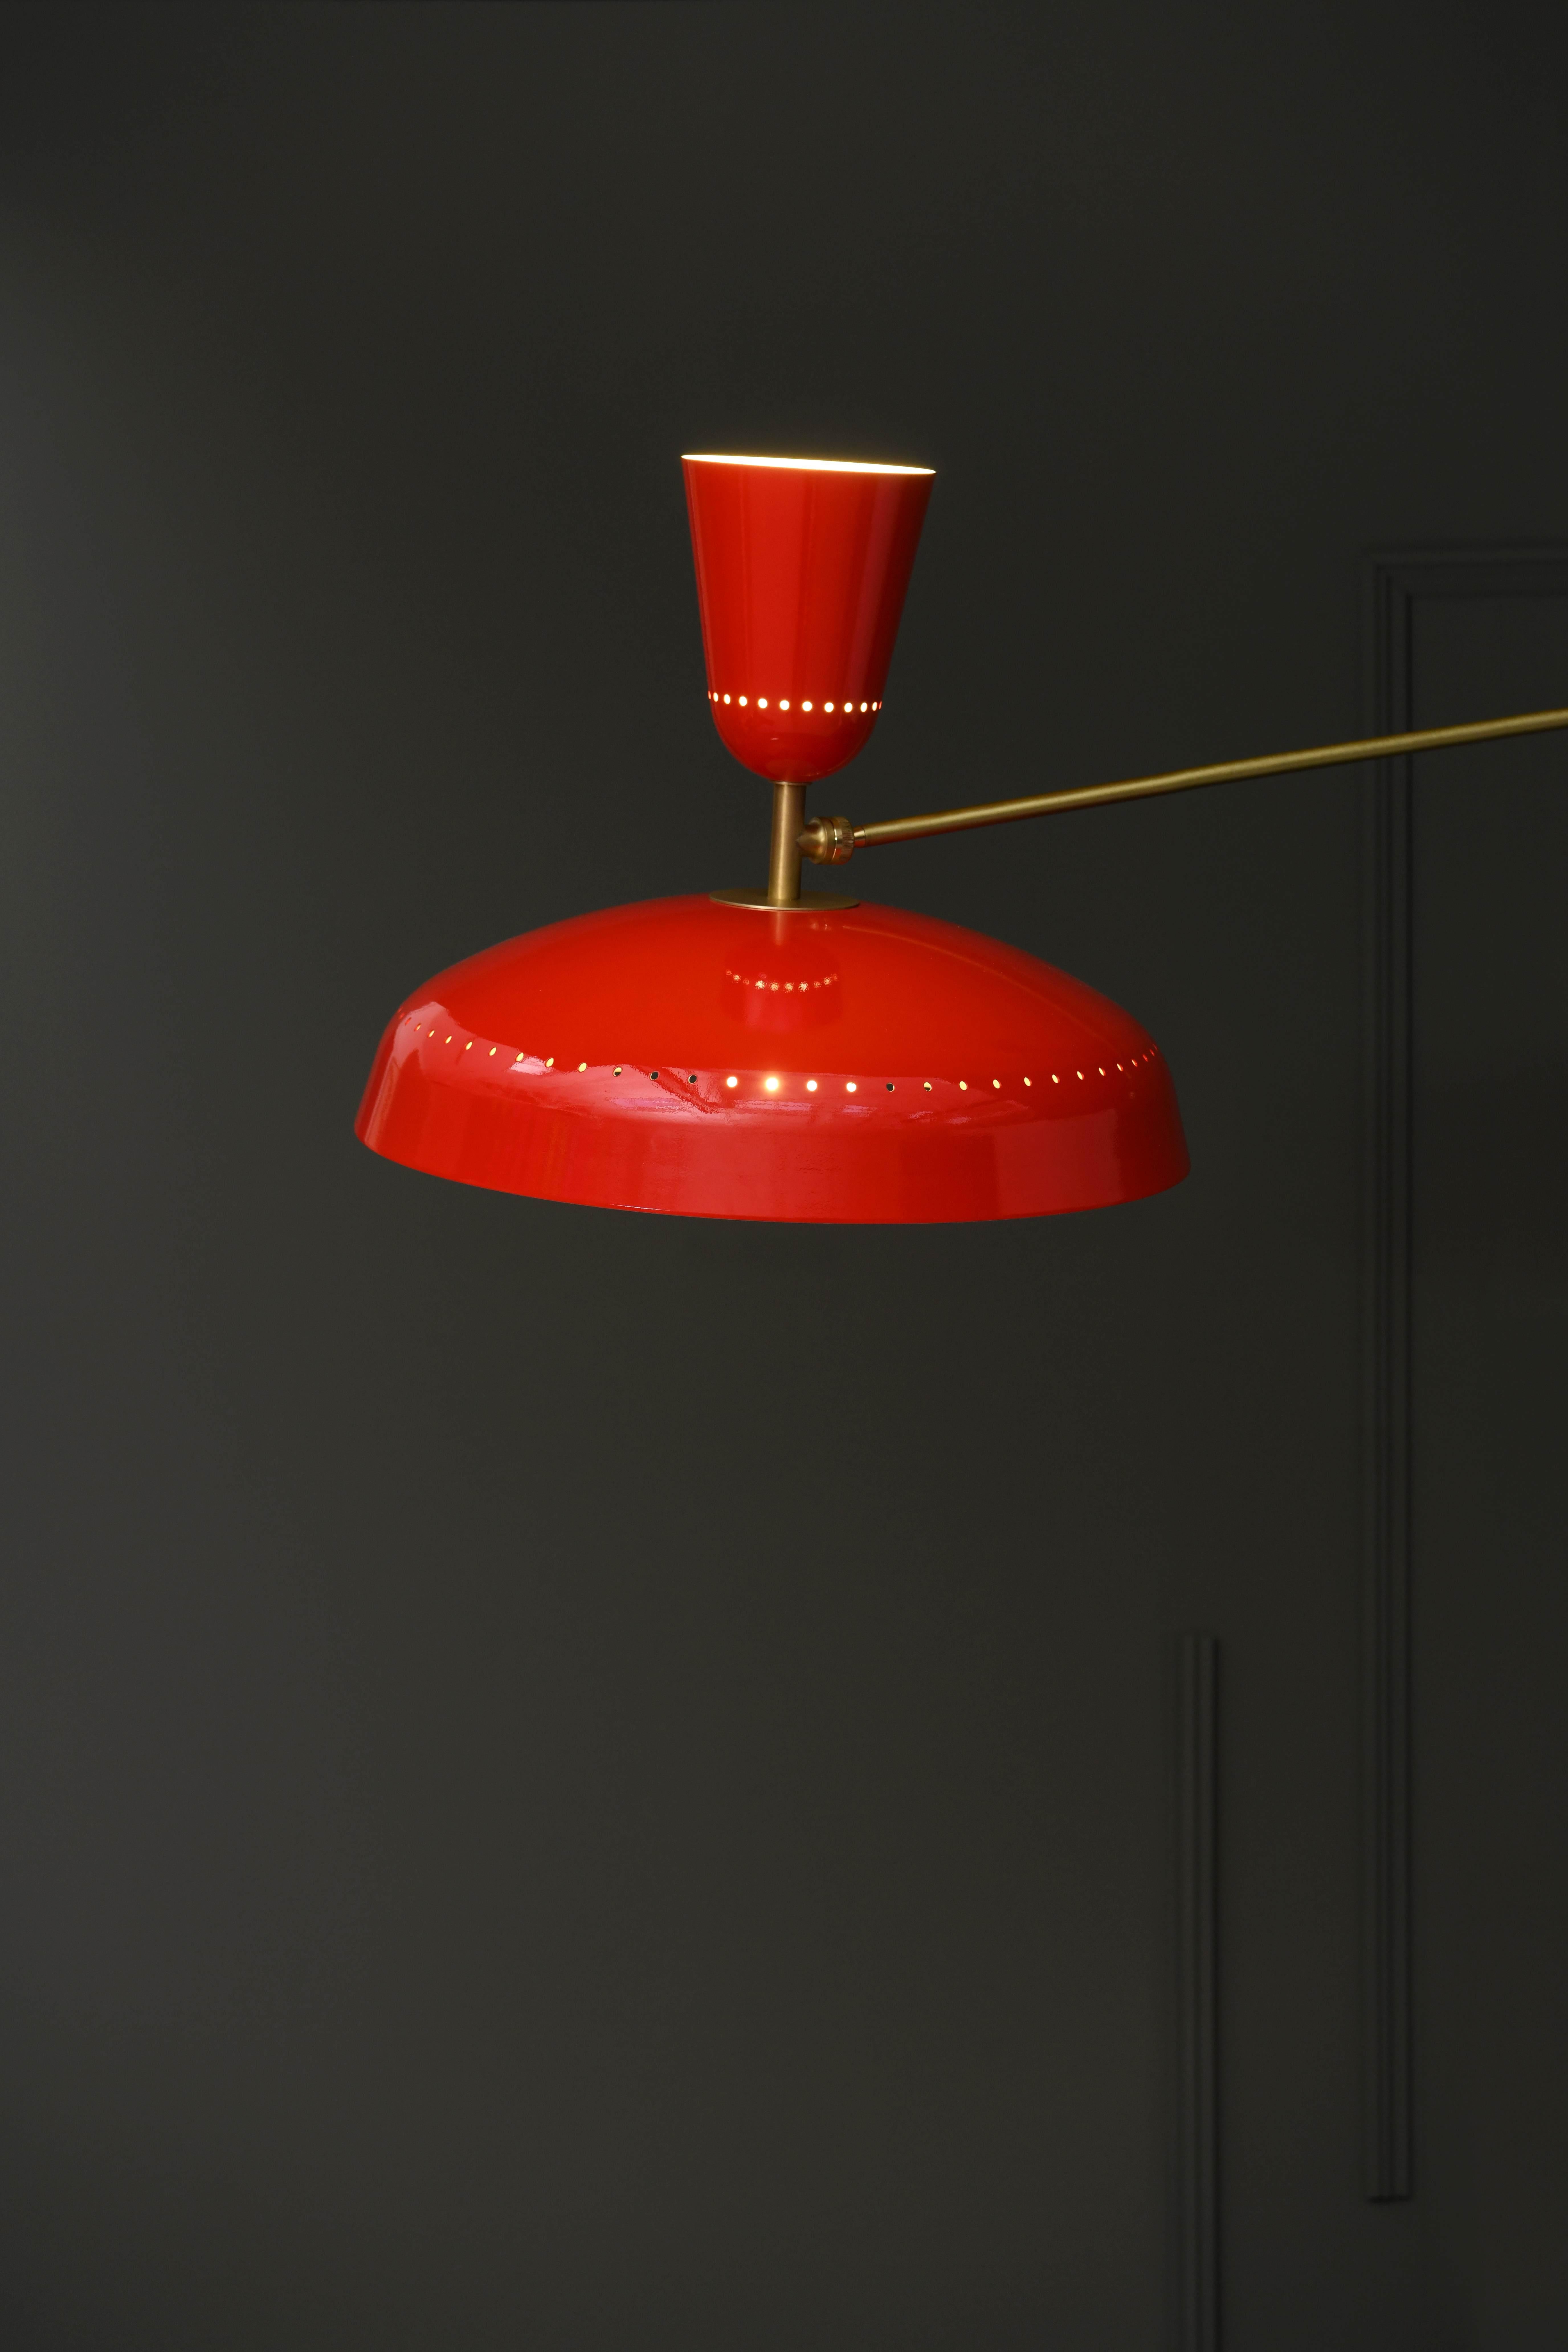 Large Pierre Guariche 'G1' wall lamp for Sammode Studio in red. 

Originally designed by Pierre Guariche in 1951, this monumental wall lamp is newly produced in an authorized re-edition by Sammode Studio in France embracing many of the same